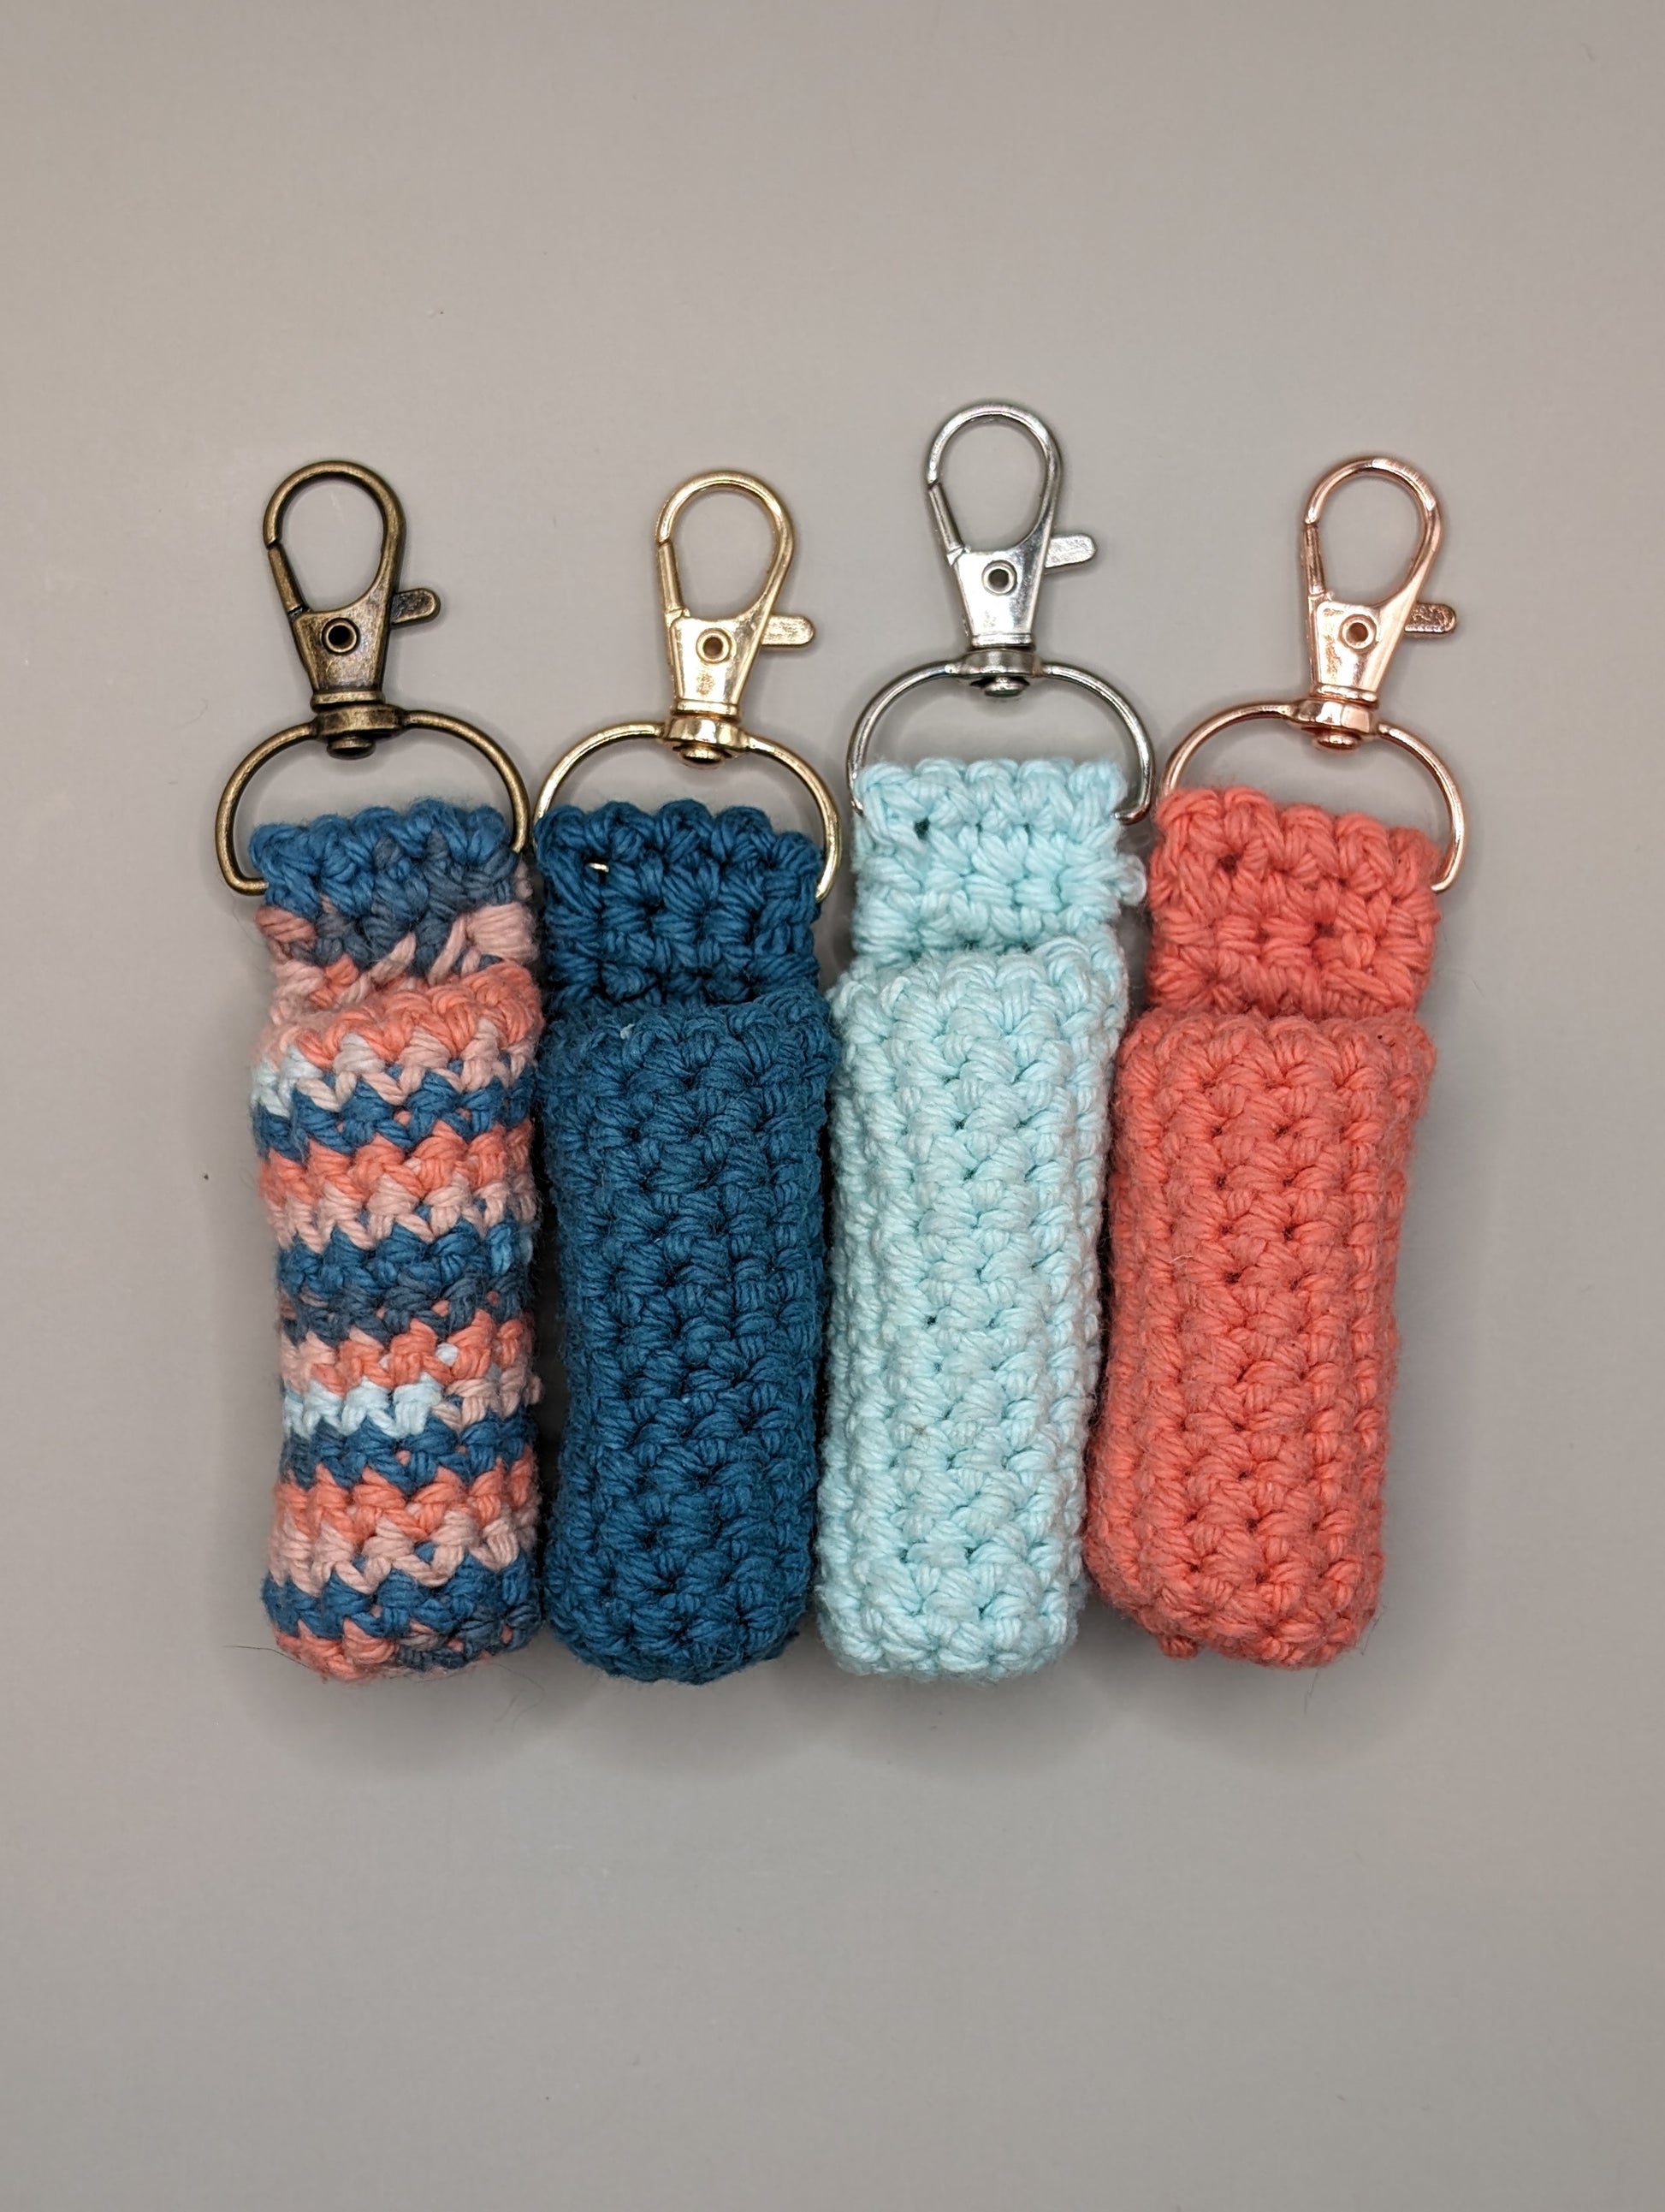 Hand-Crocheted Caddy for Lip Balm, Lip Oil, Inhalers, etc | By Robin Creations 